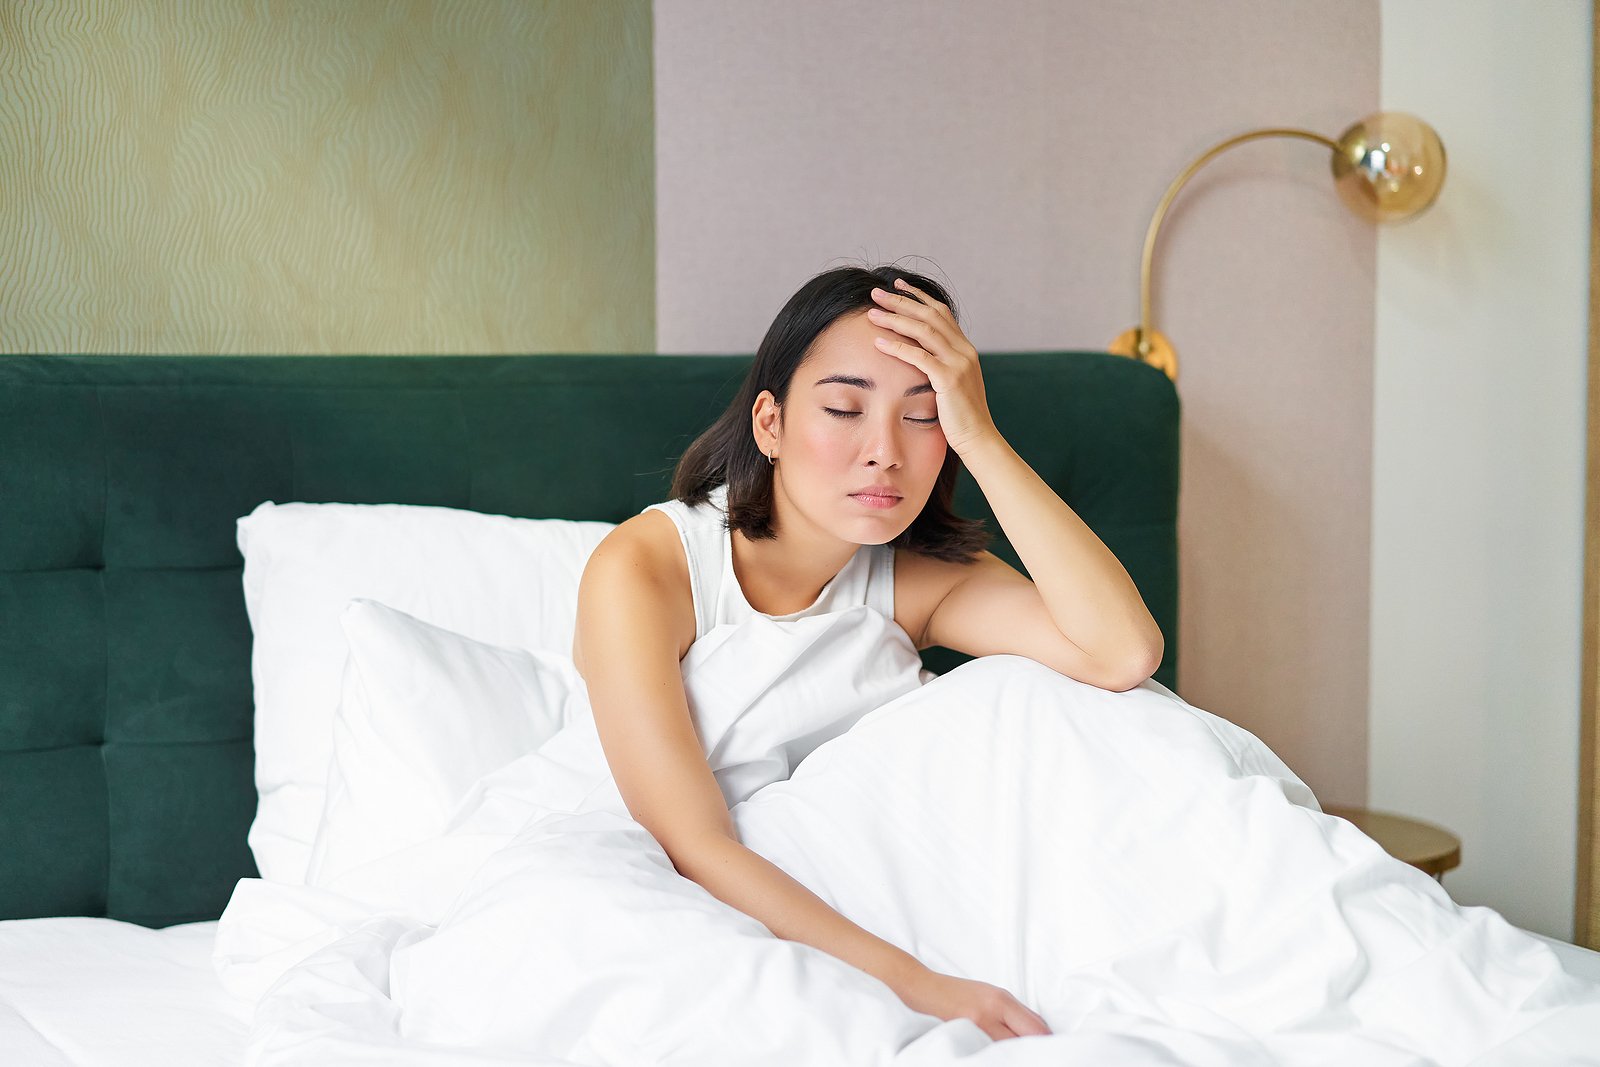 Night Owl vs. DSPS vs. Insomnia: What's the Difference? Signs and Symptoms